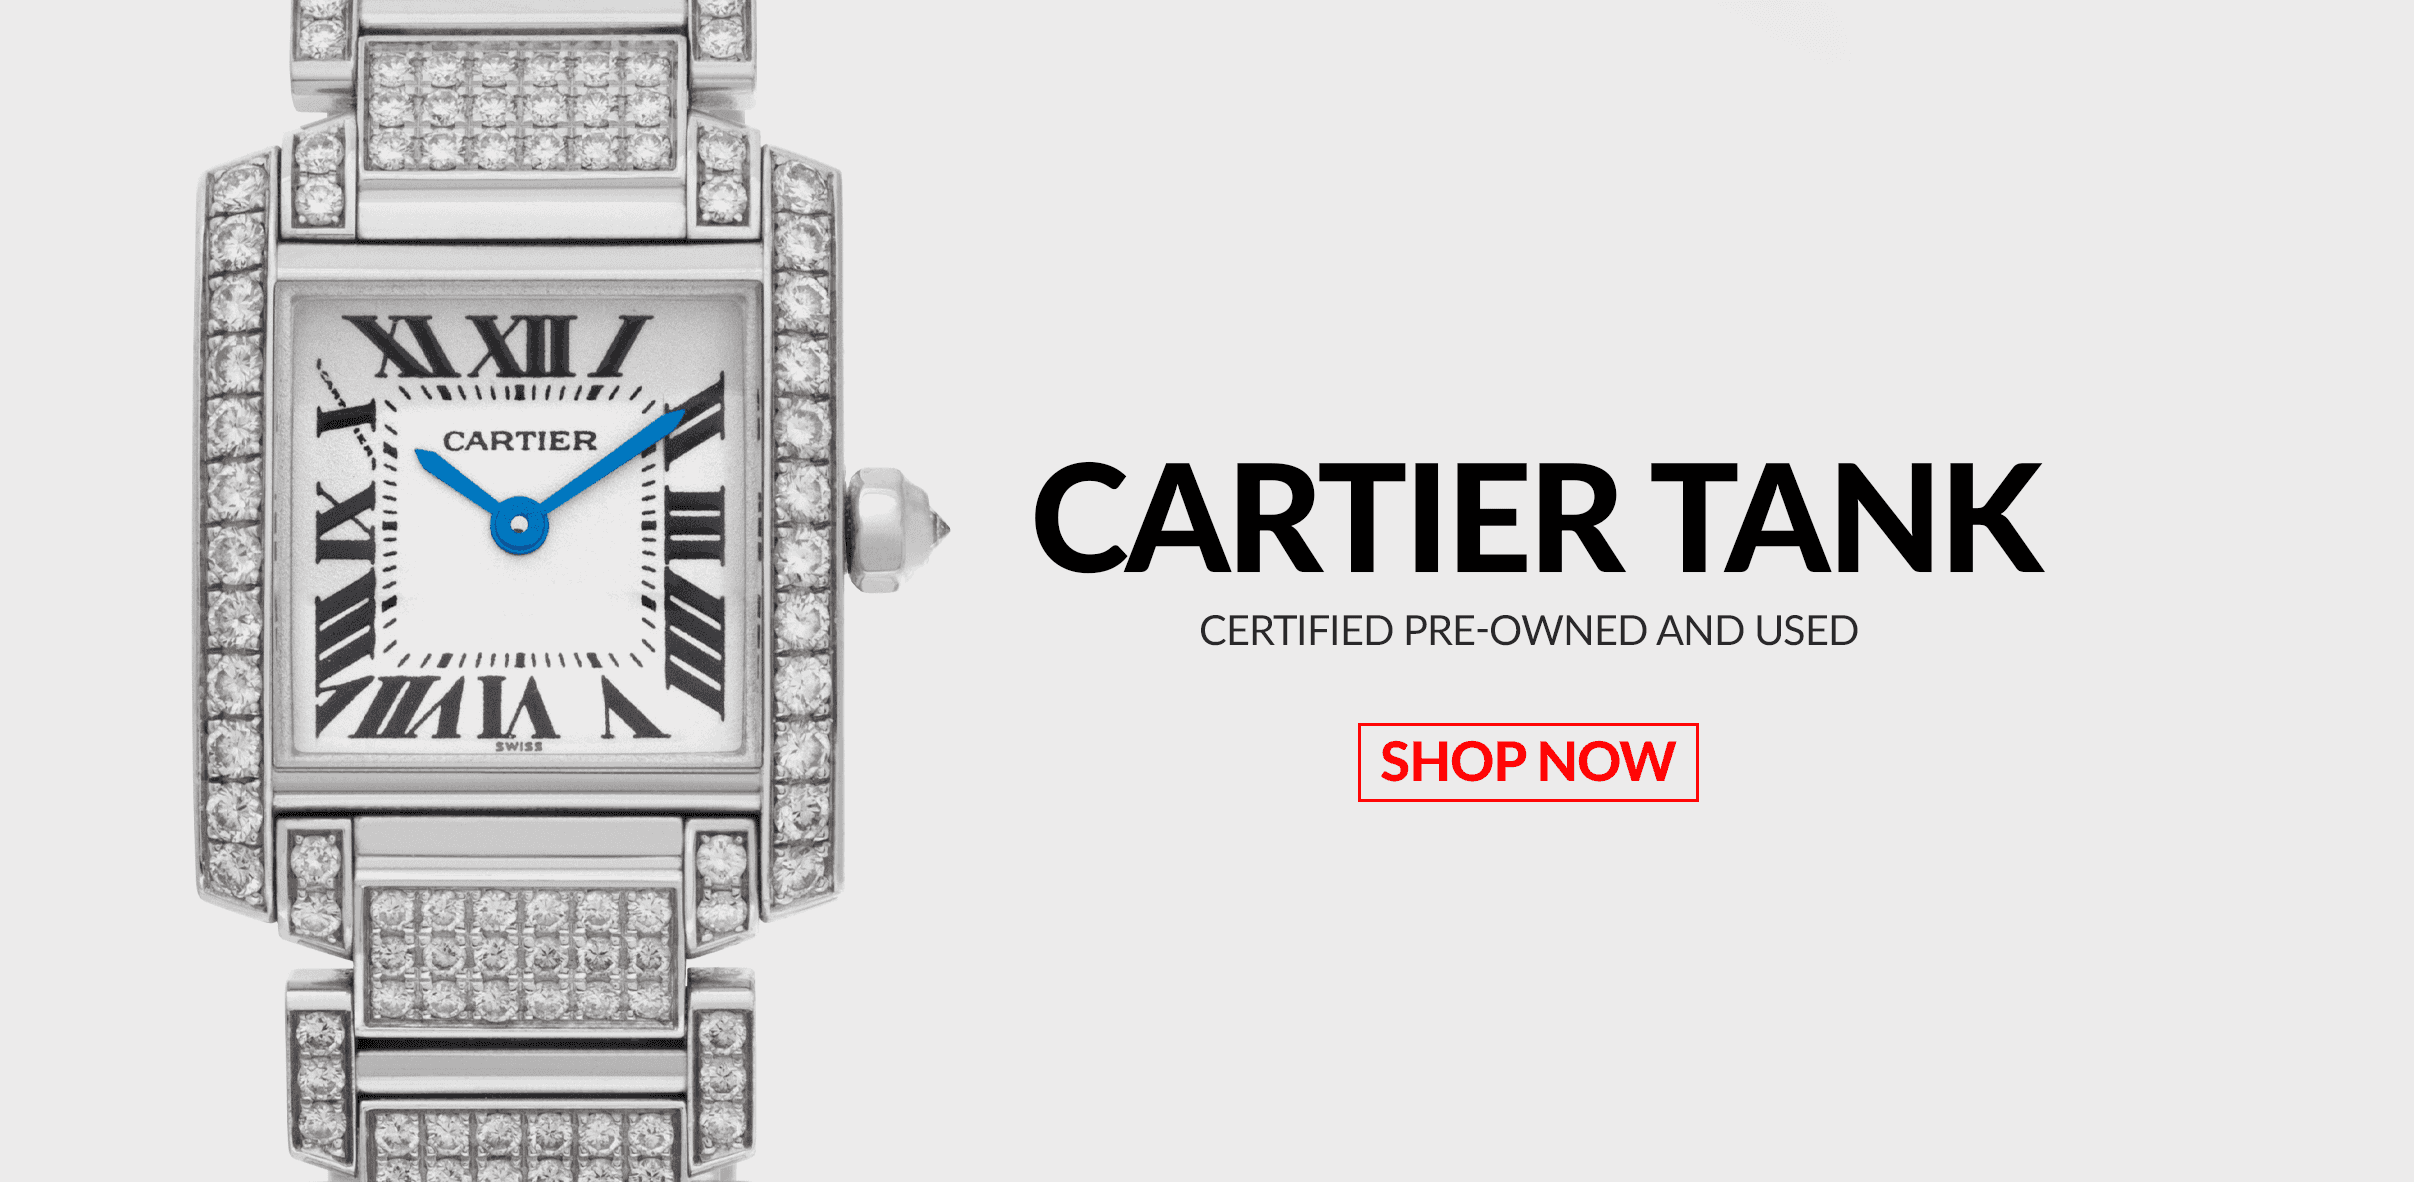 Pre-Owned Certified Used Cartier Tank Header